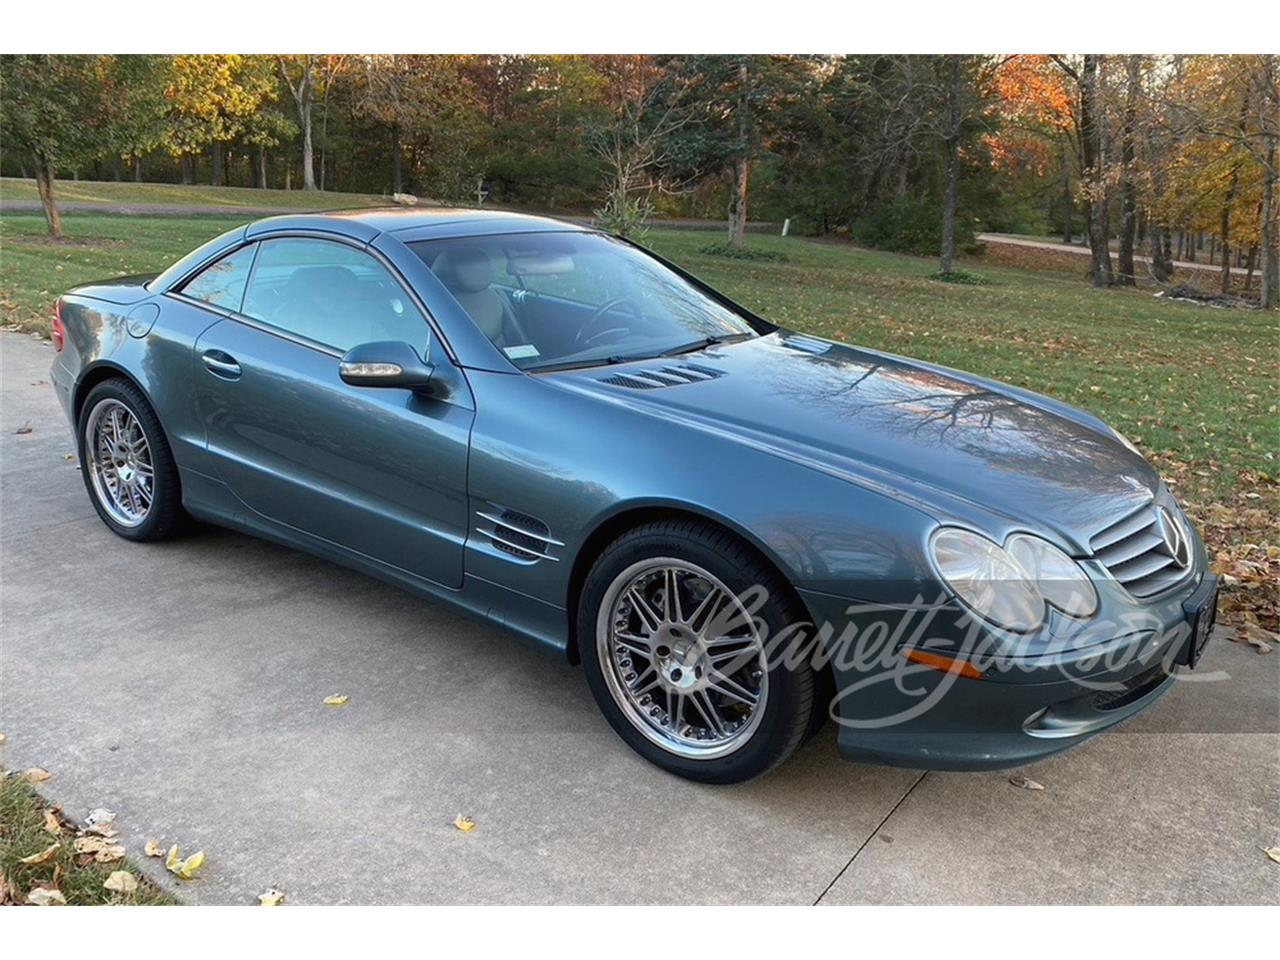 For Sale at Auction: 2003 Mercedes-Benz SL500 in Scottsdale, Arizona for sale in Scottsdale, AZ